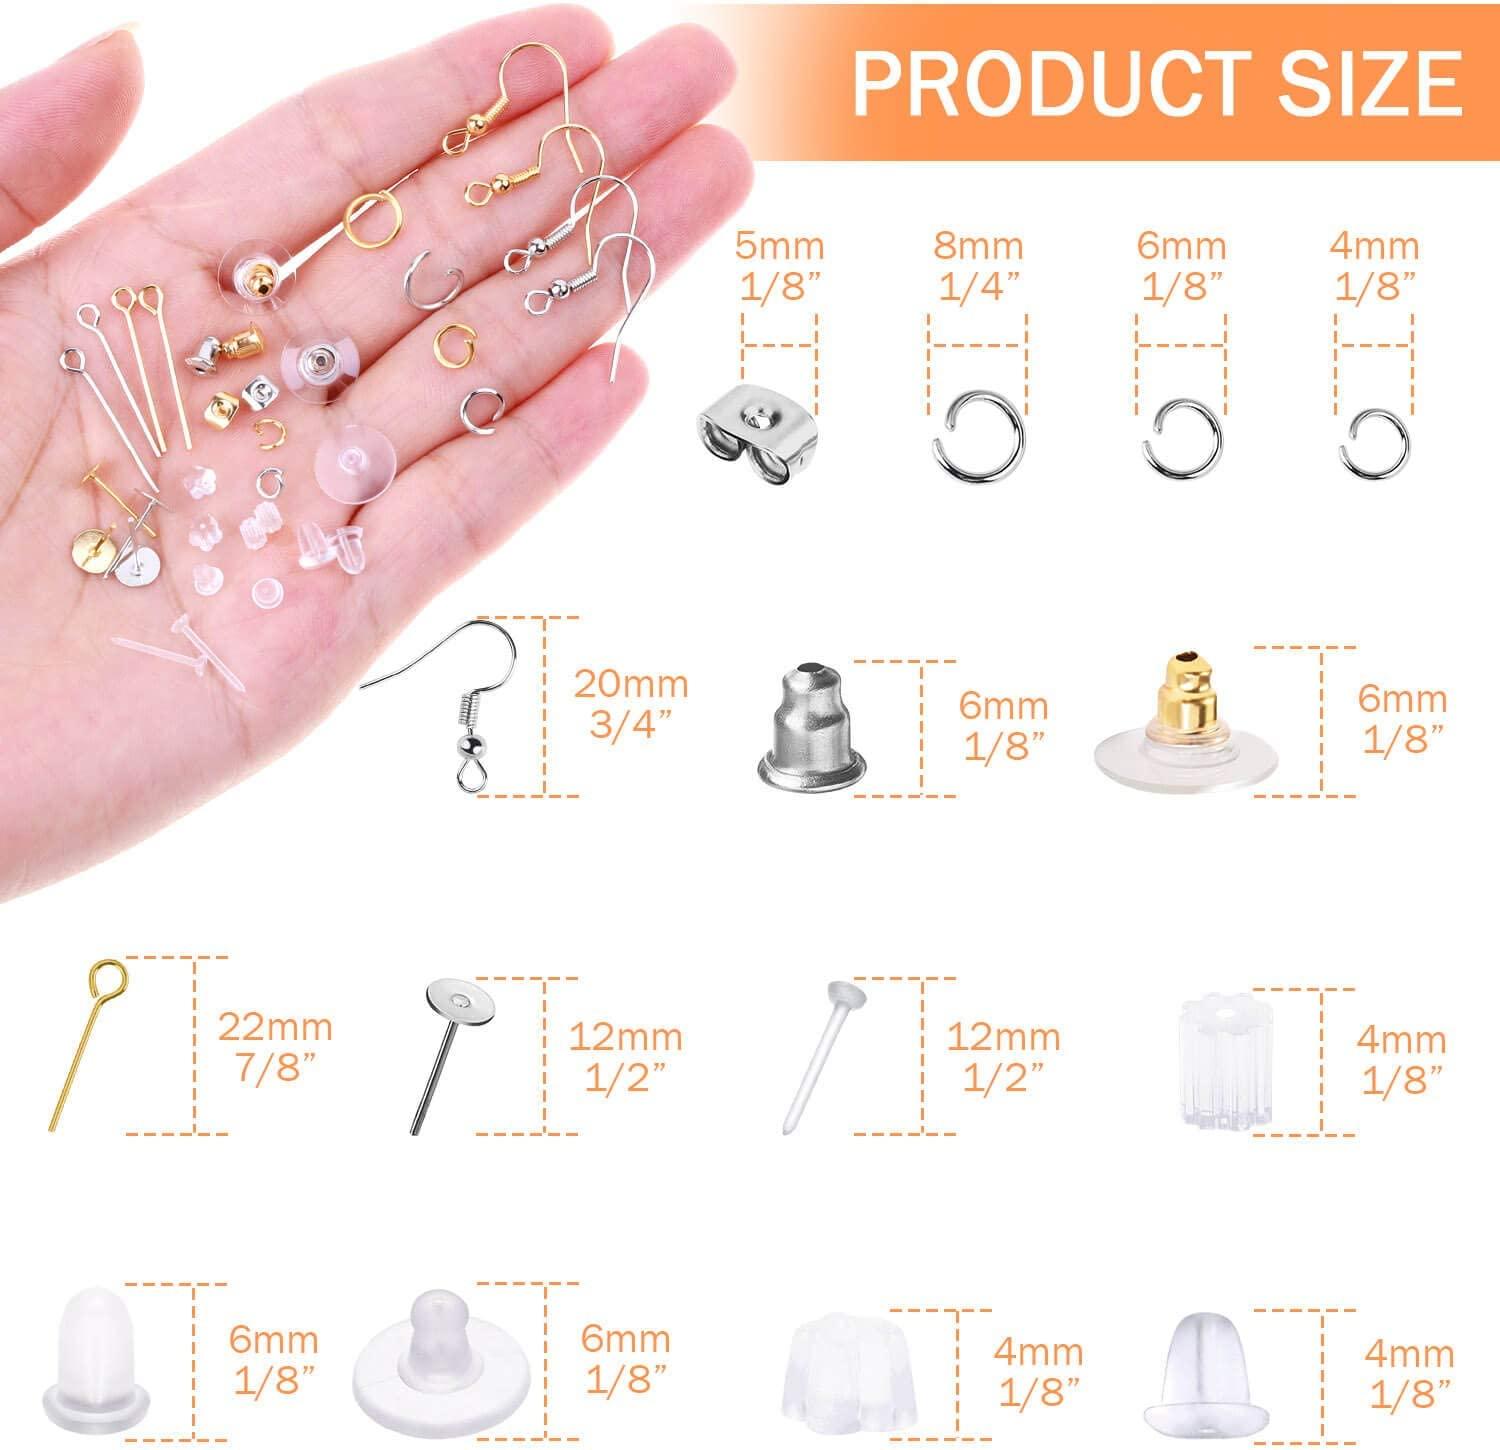  Earrings Hooks for Jewelry Making, Anezus 2000Pcs Earring  Making Supplies Kit with Fish Hook Earrings, Earring Cards, Jewelry Plier,  Earring Backs and Jump Ring for Jewelry Making and Earring Repair